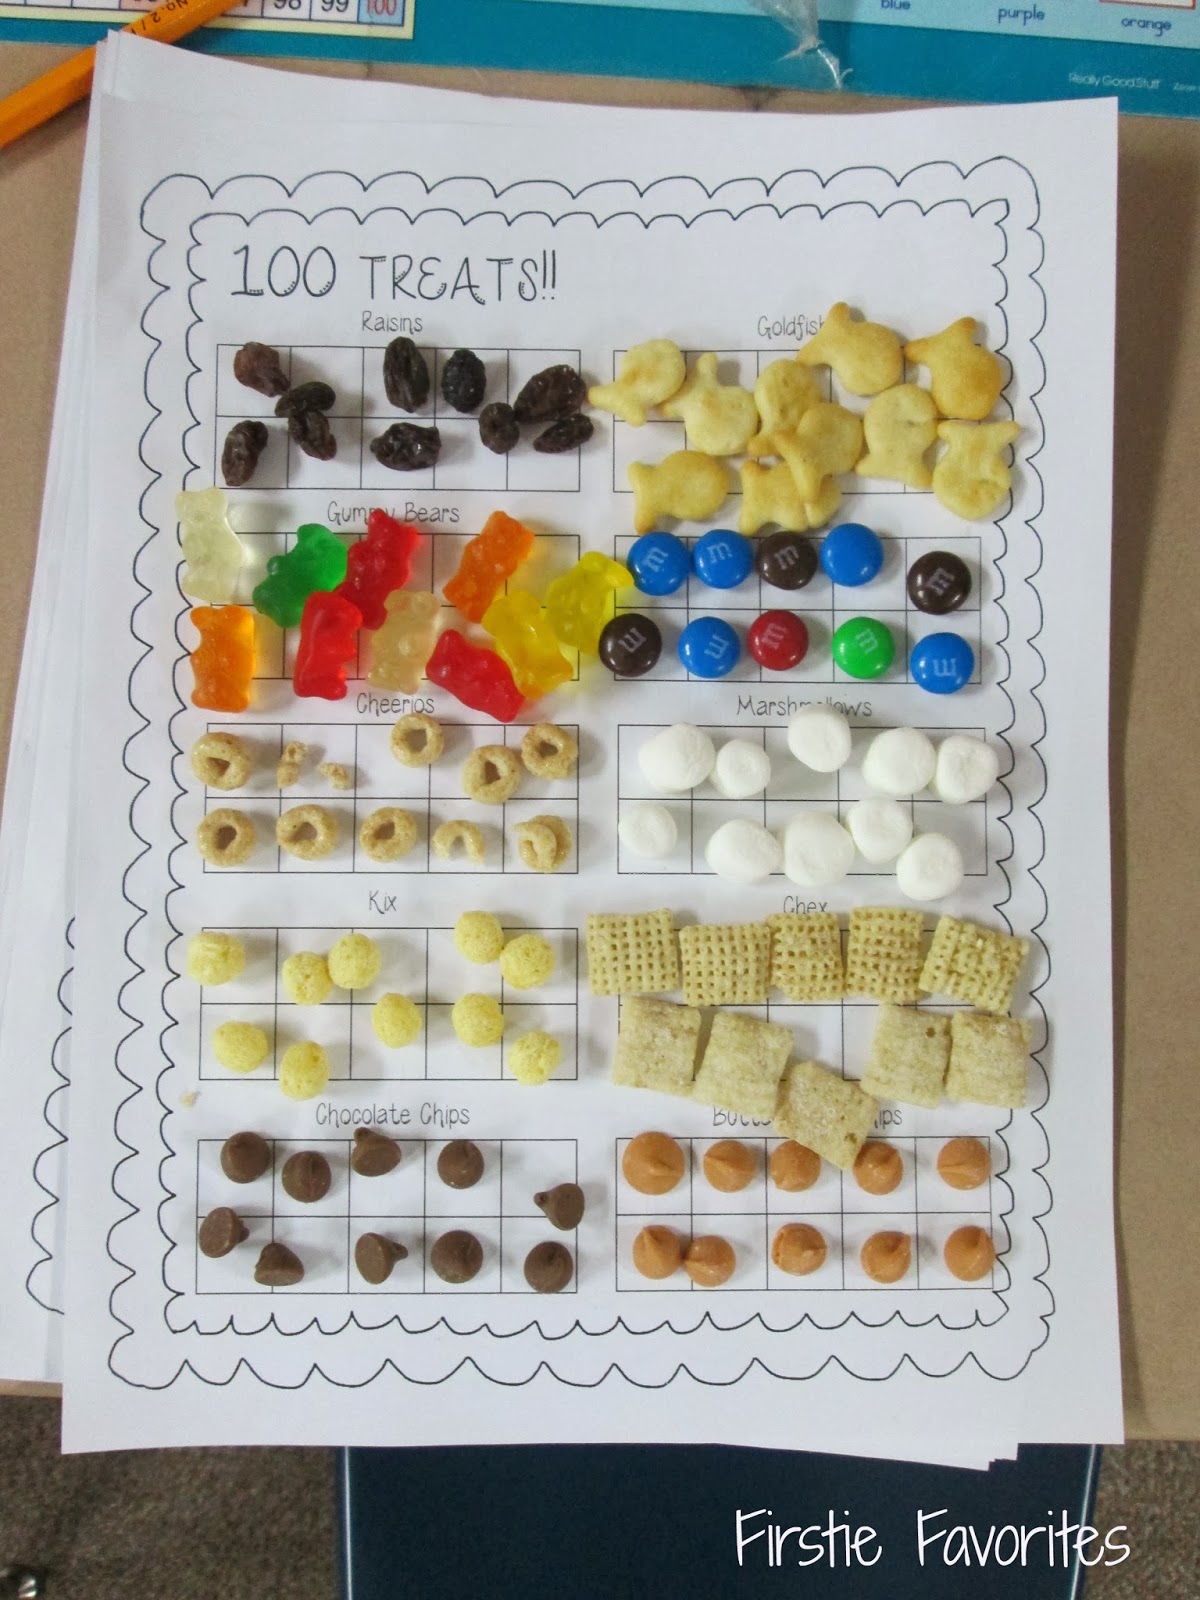 The 100th day of school is a big deal celebration in any and all classrooms. Whether you are dressing up to be 100 years old, counting gumdrops, or building a 100 cup structure, you'll absolutely love these tasty treats to enjoy during your festivities.